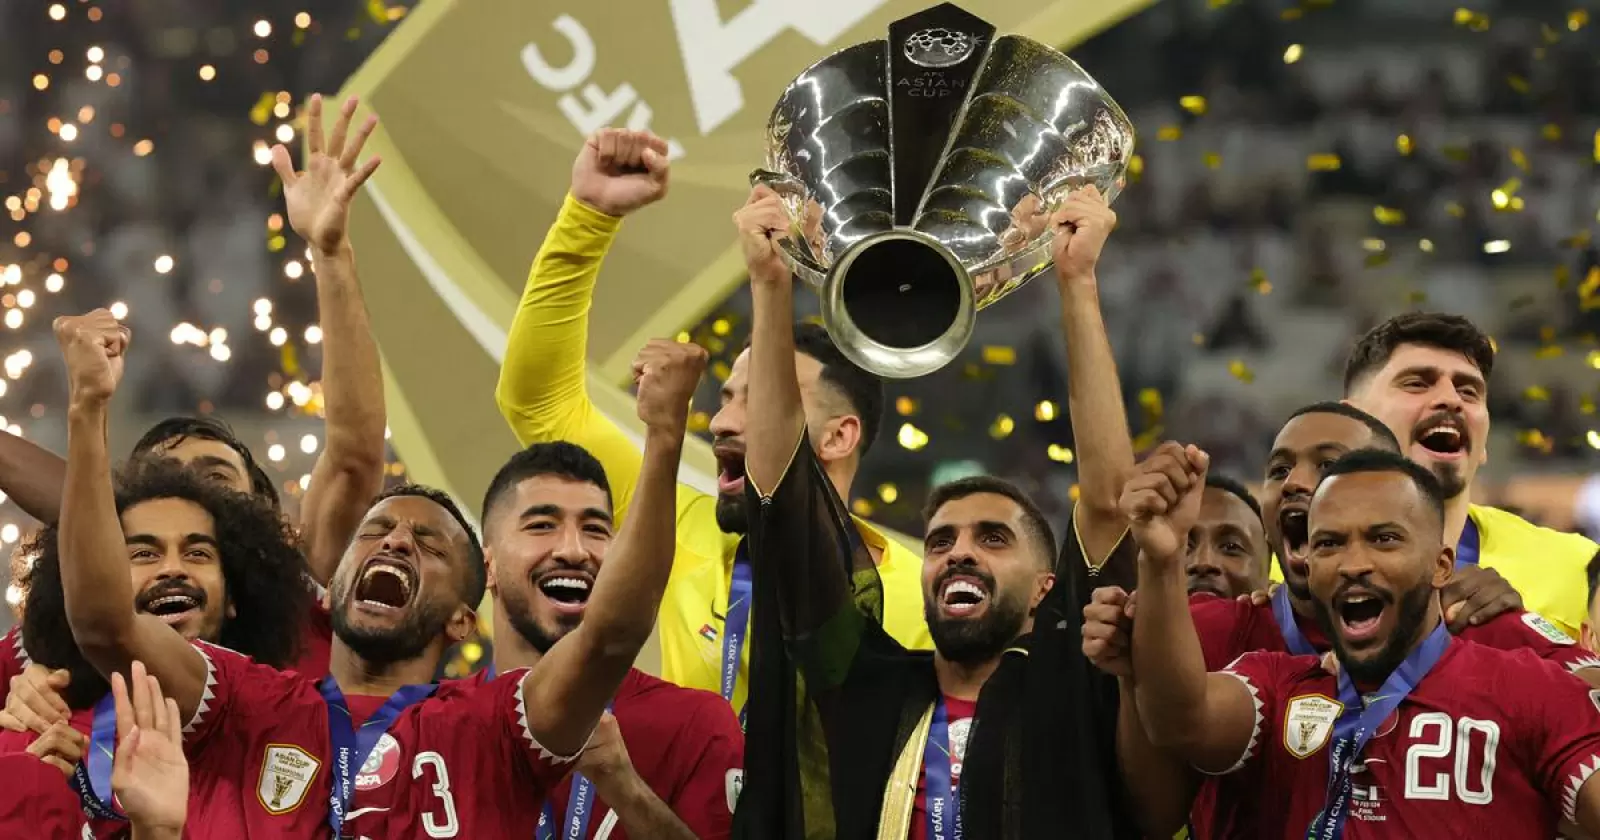 AFC Asian Cup Football: Qatar became champion for the second time by defeating Jordan 3-1